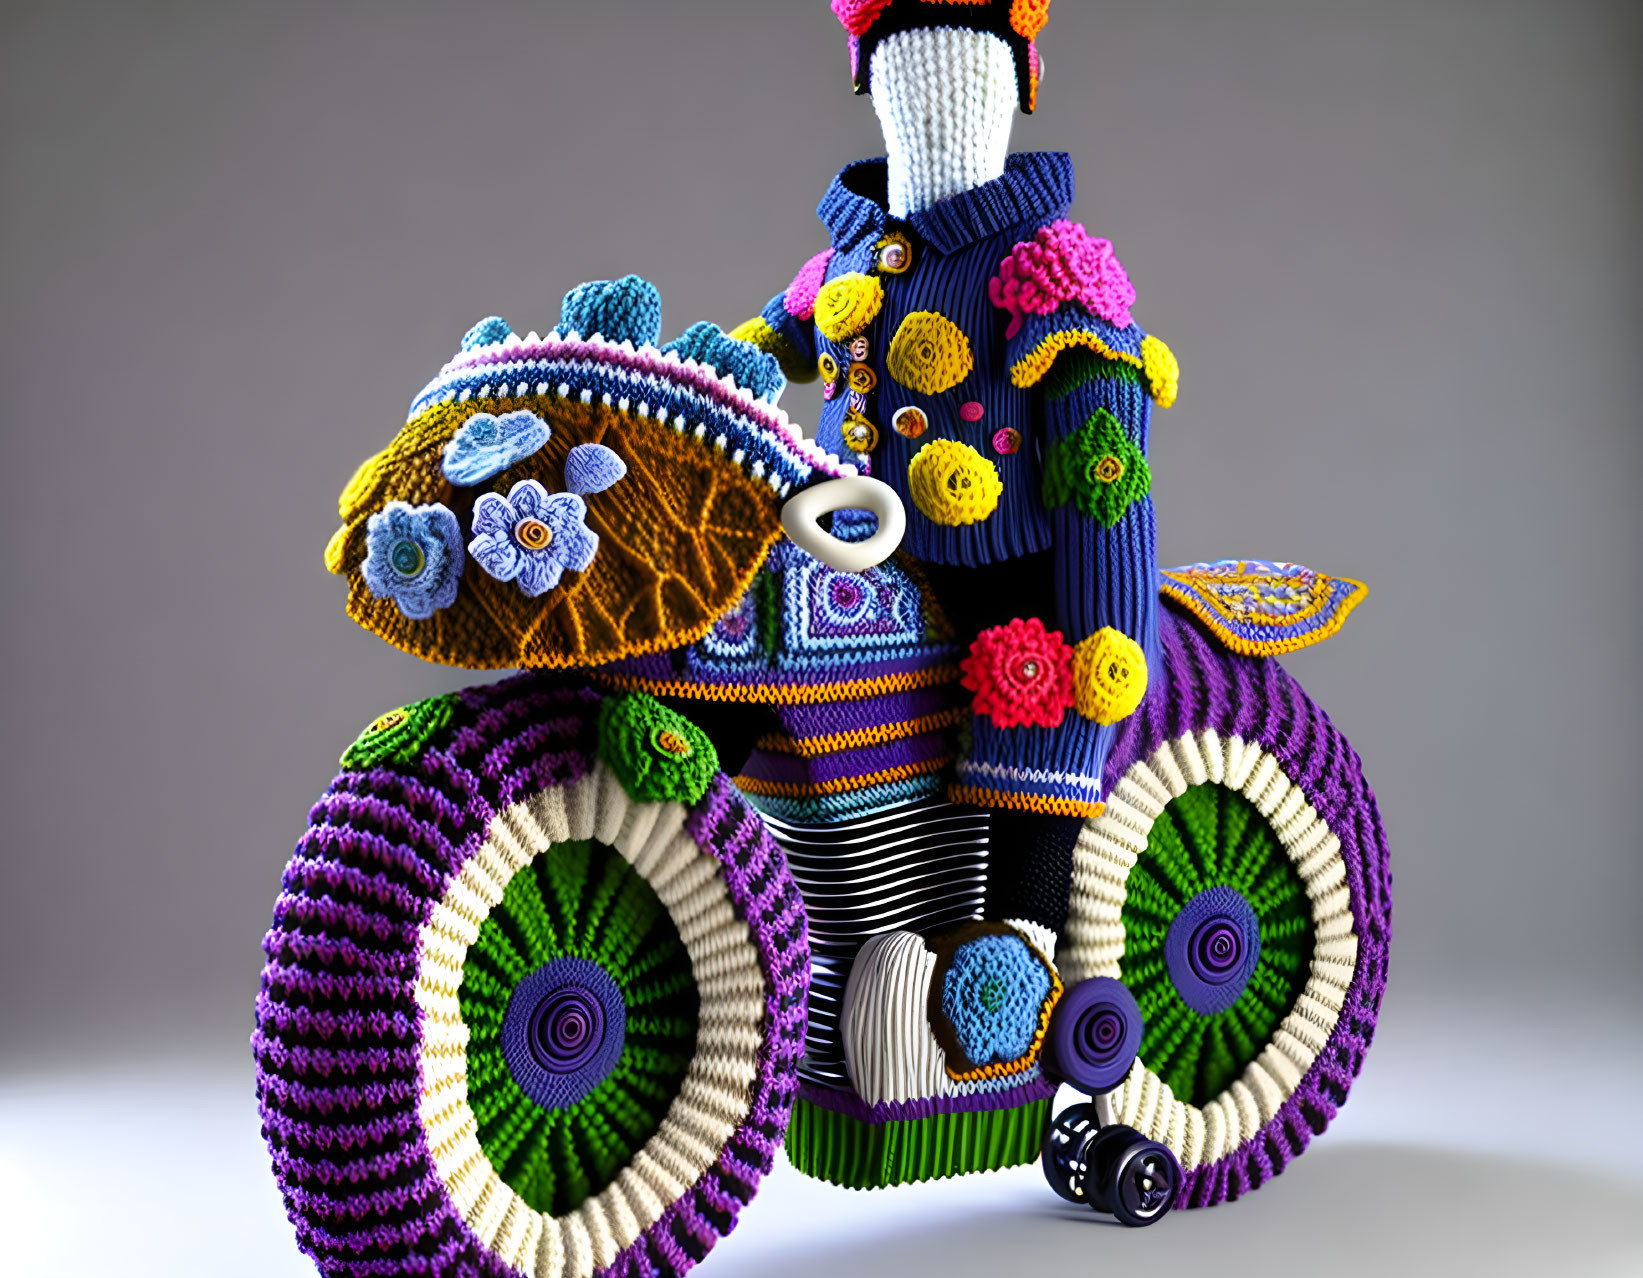 Ornate knitted motorcycle with rider